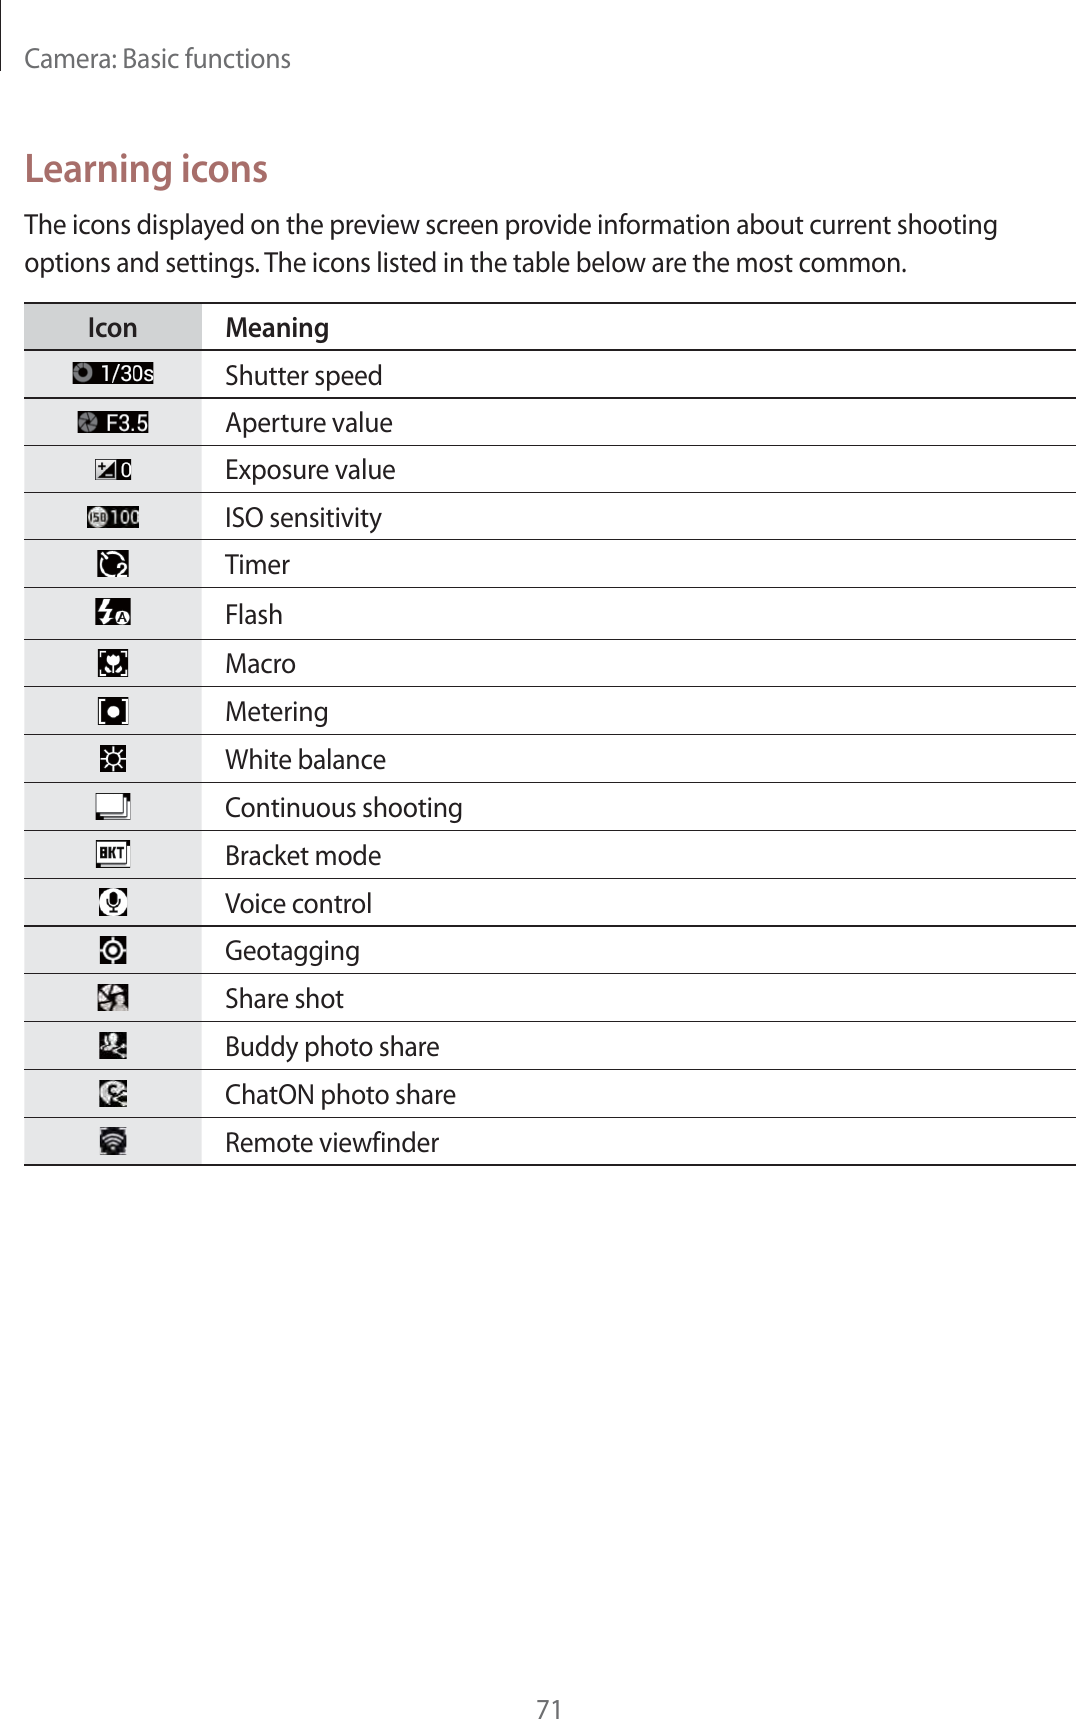 Camera: Basic functions71Learning iconsThe icons displayed on the preview screen provide information about current shooting options and settings. The icons listed in the table below are the most common.Icon MeaningShutter speedAperture valueExposure valueISO sensitivityTimerFlashMacroMeteringWhite balanceContinuous shootingBracket modeVoice controlGeotaggingShare shotBuddy photo shareChatON photo shareRemote viewfinder